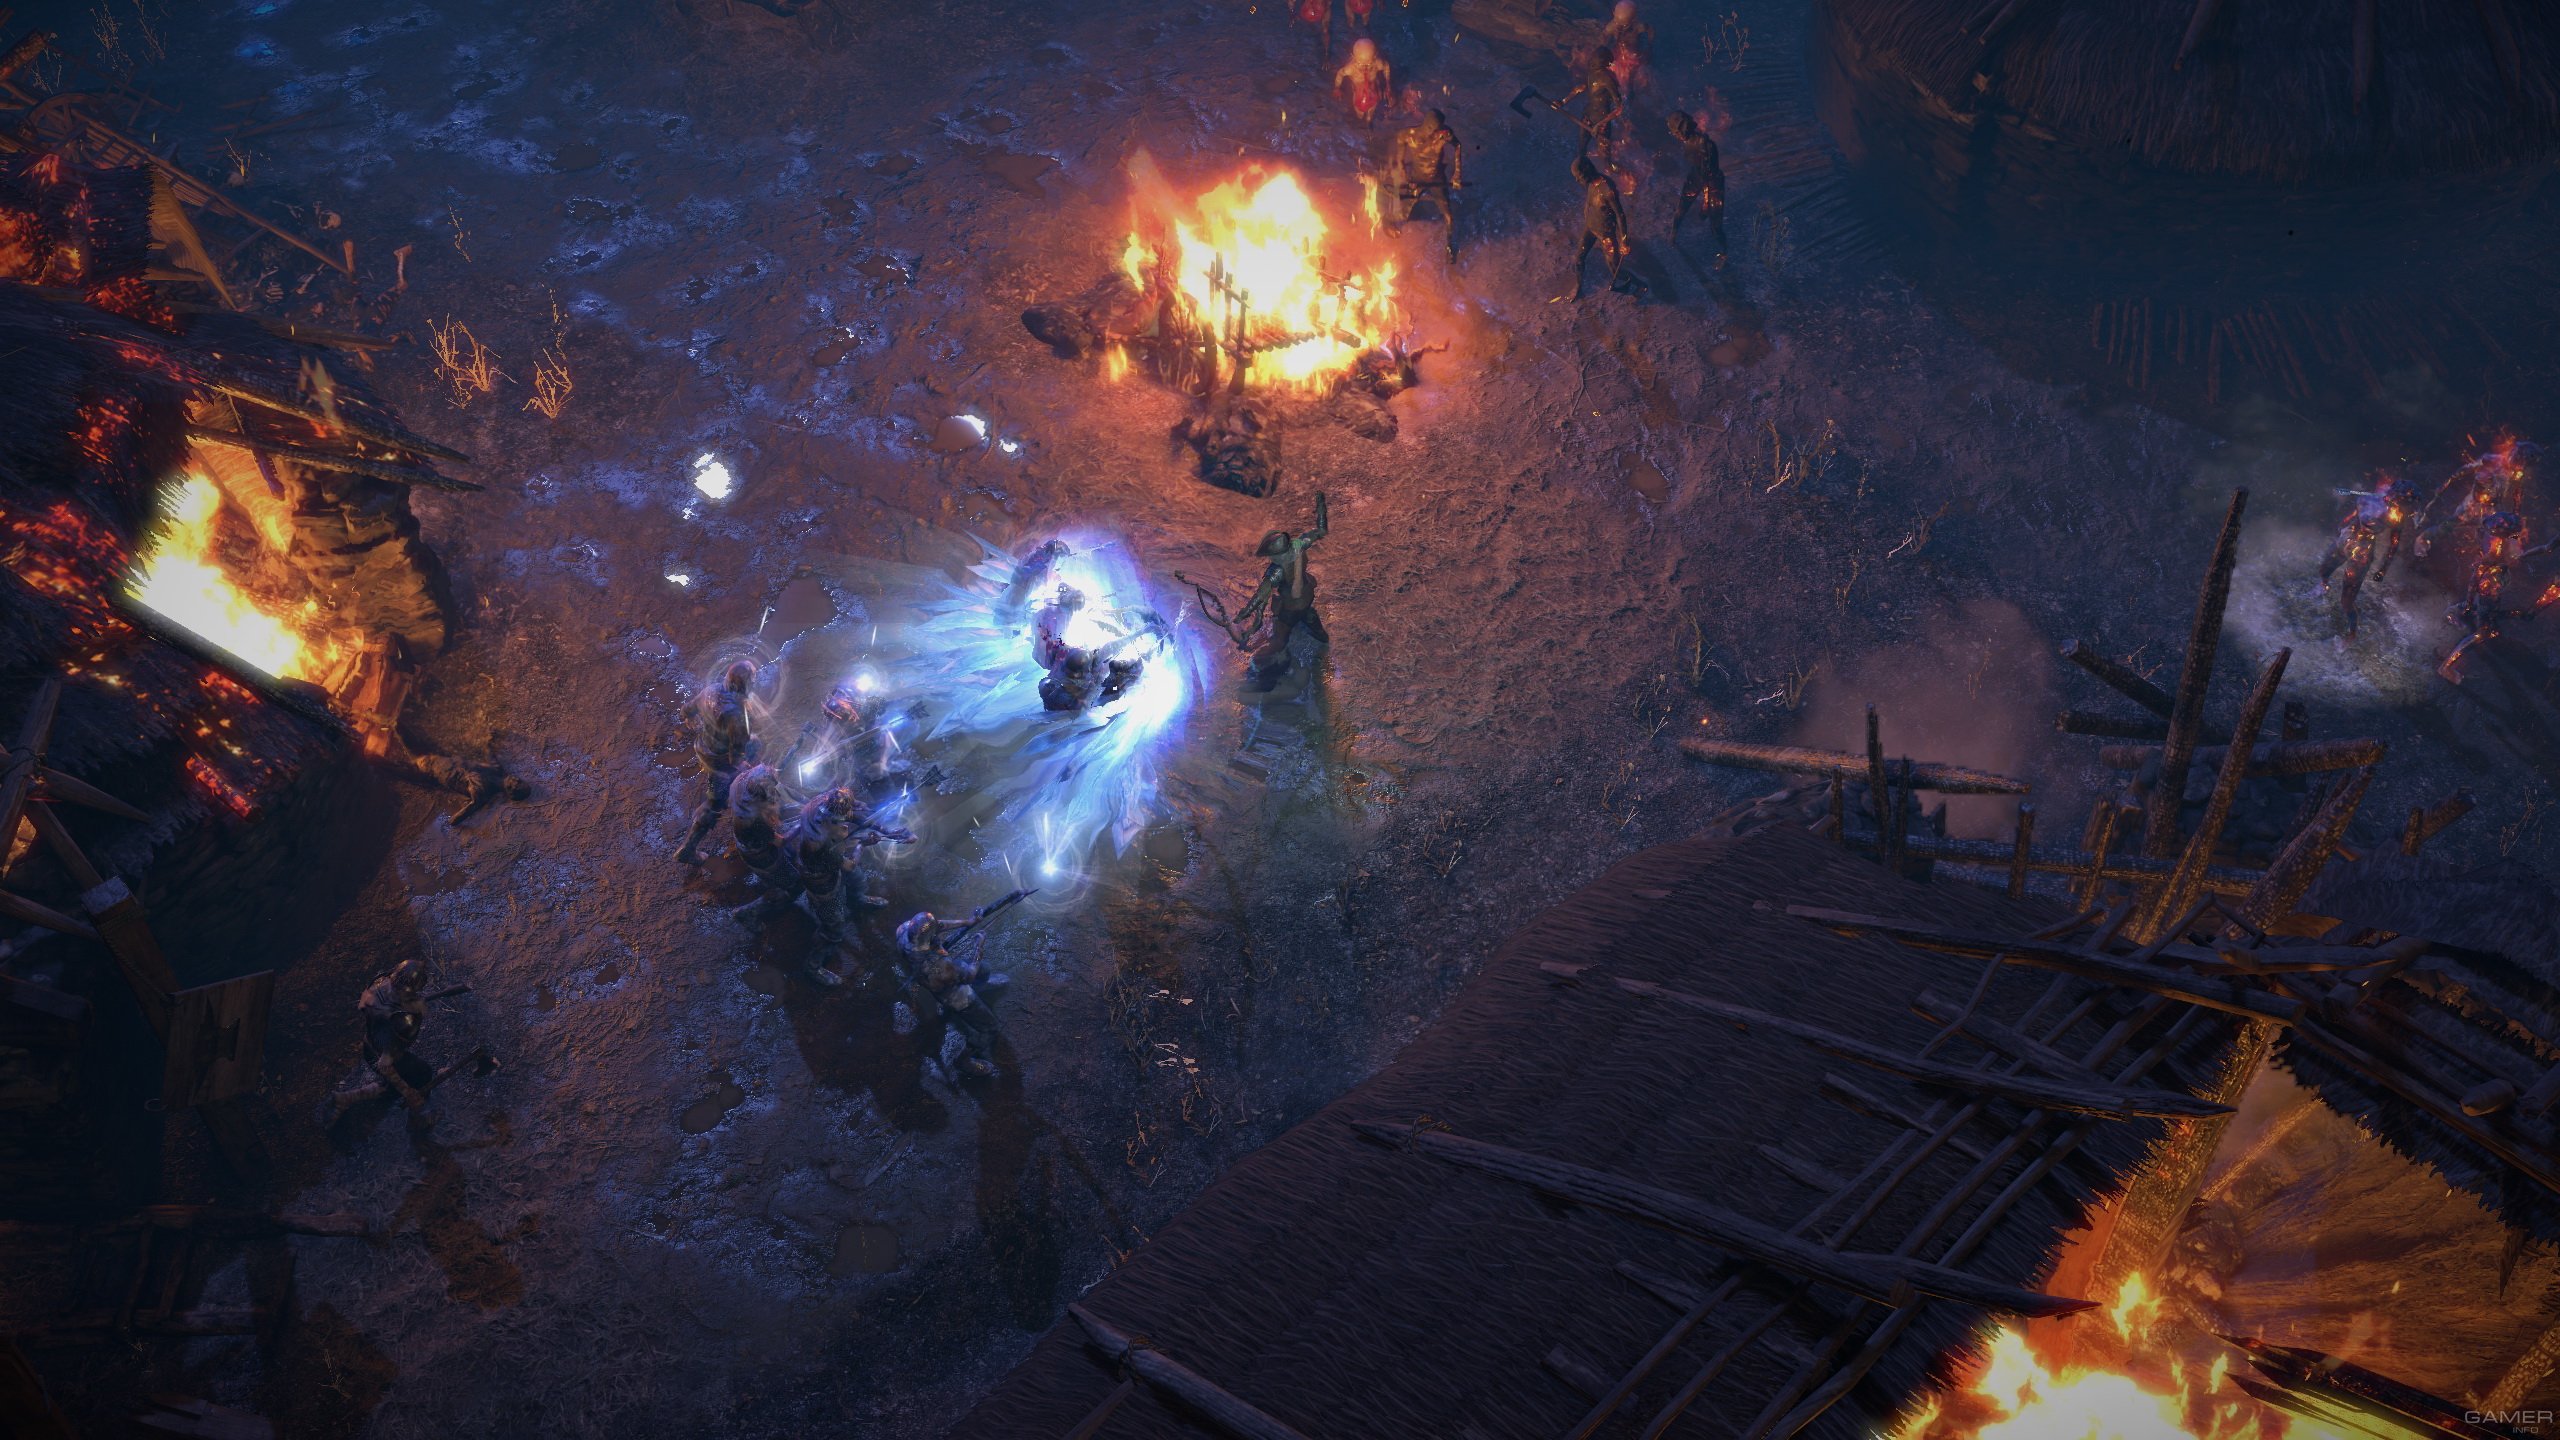 path of exile 2 co op